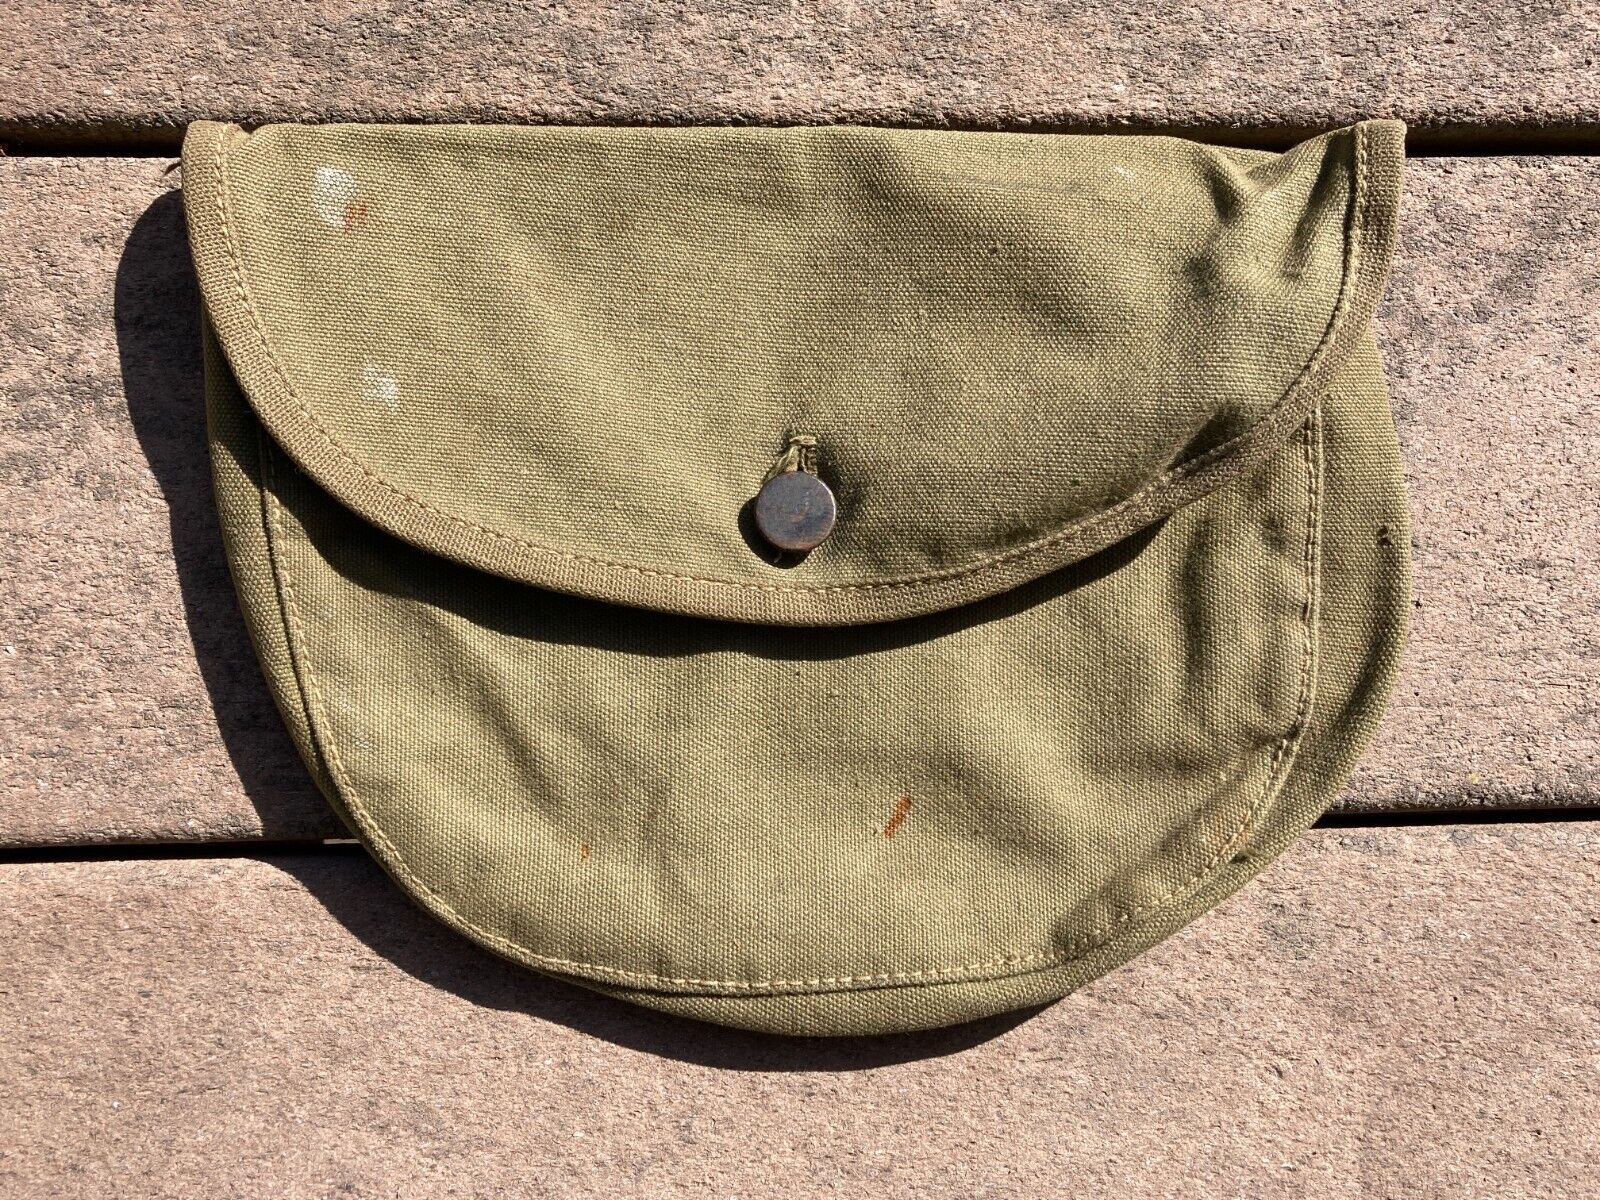 WW1 M1910 US ARMY MILITARY M1910 PEA GREEN MEAT CAN POUCH FIELD GEAR